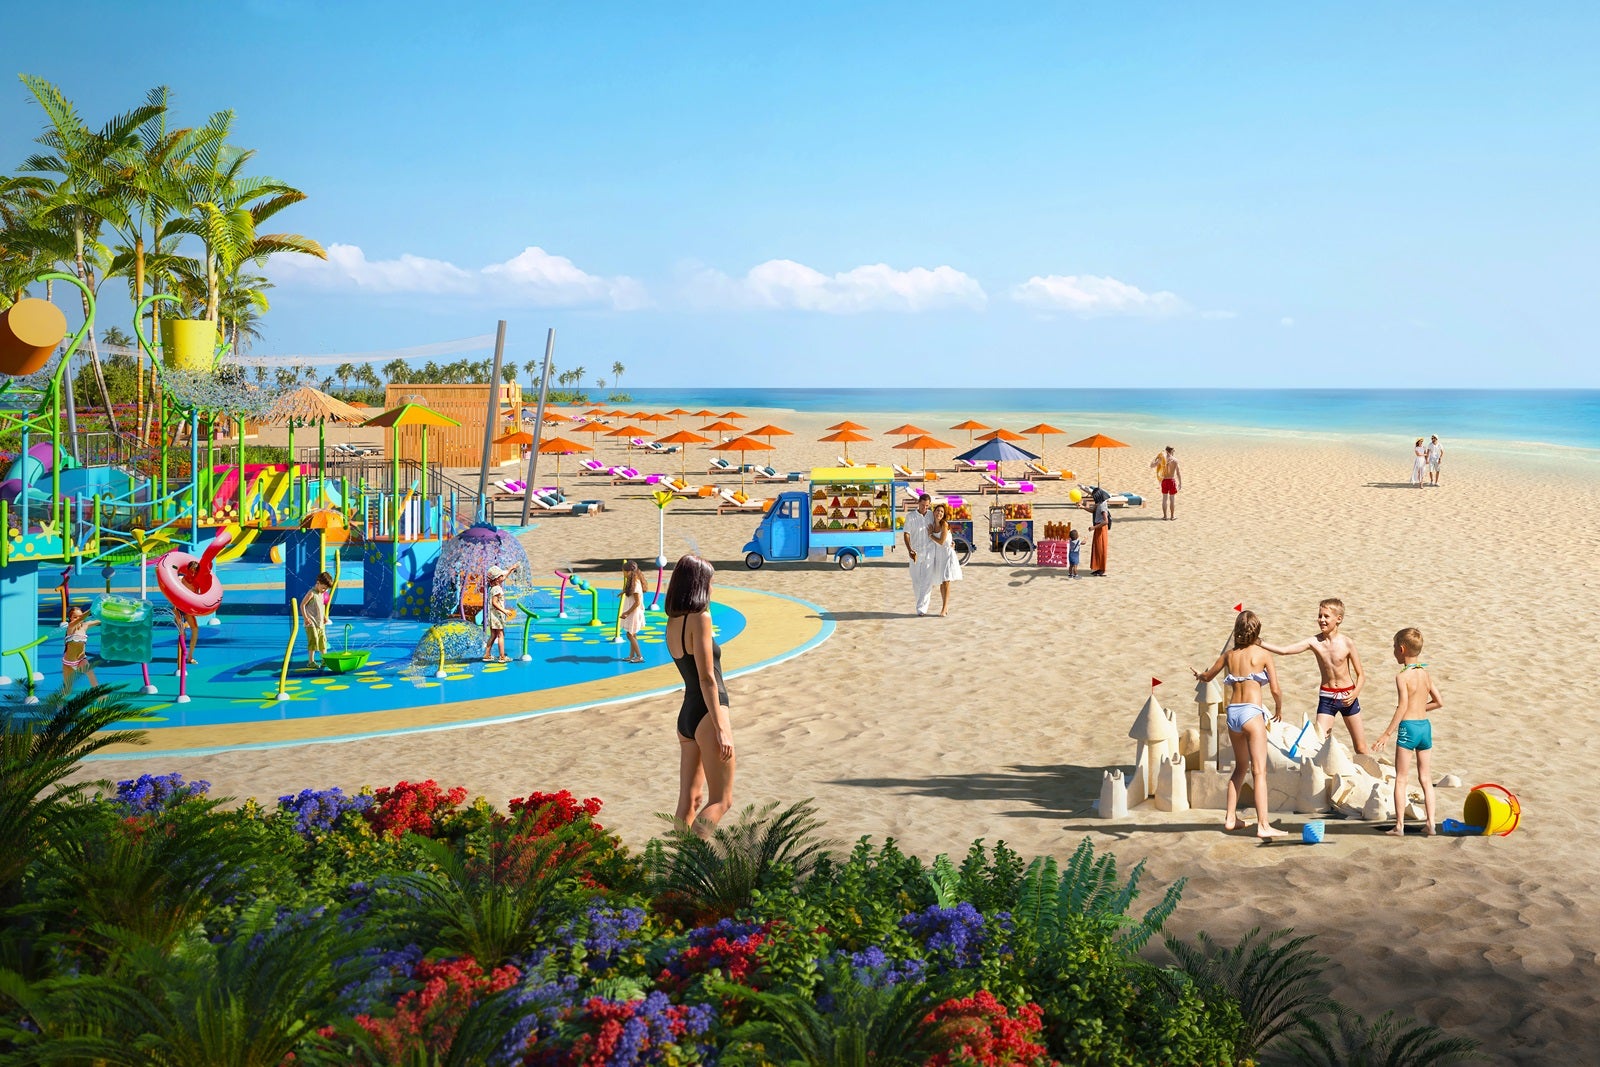 A rendering of people on a sandy beach next to a splash playground area and colorful shrubbery